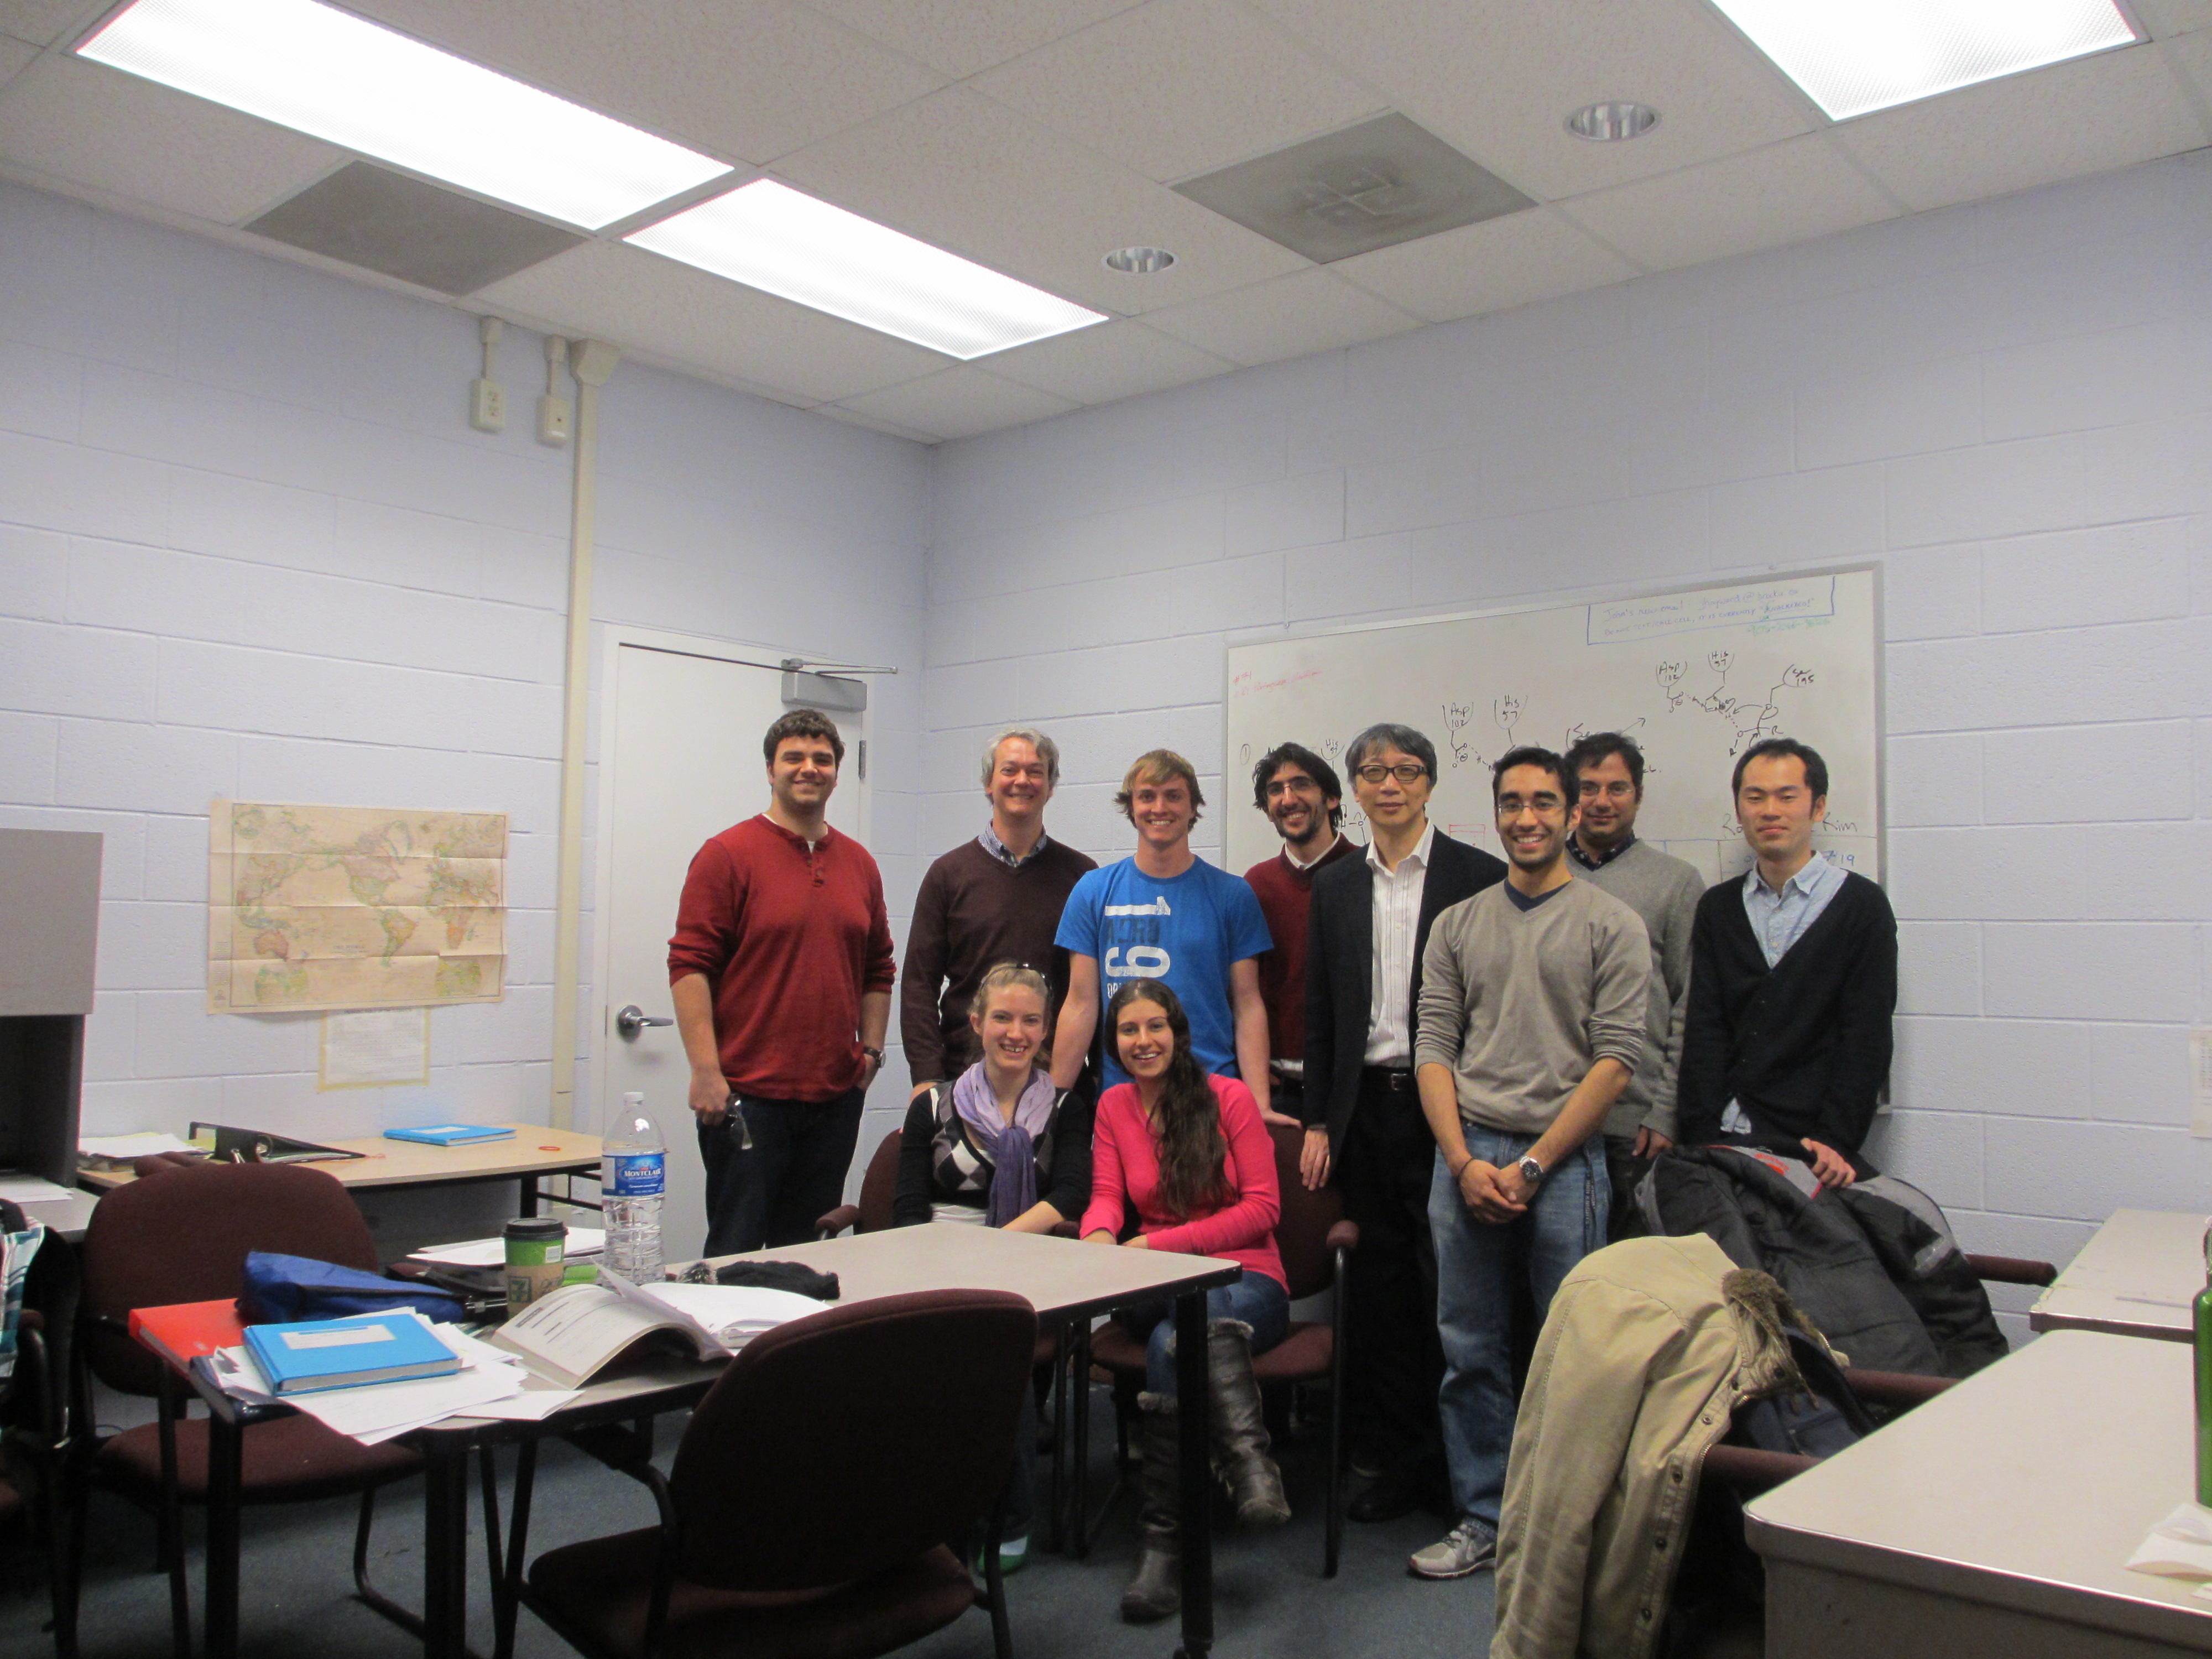 Discussion and Seminar at University of Windsor